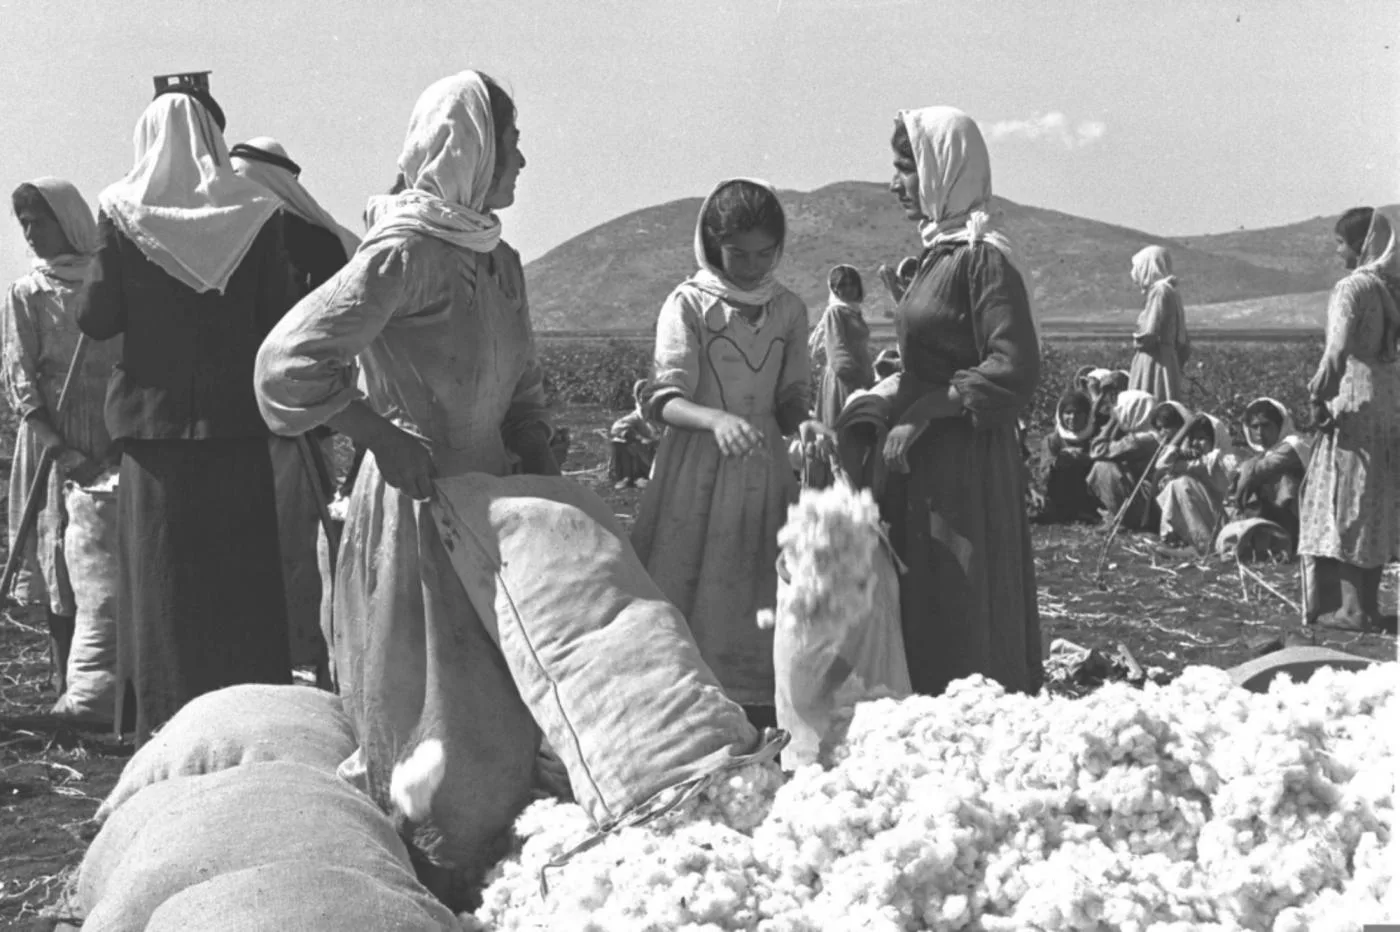 Cotton farmers 1937 Palestine agricultural memory